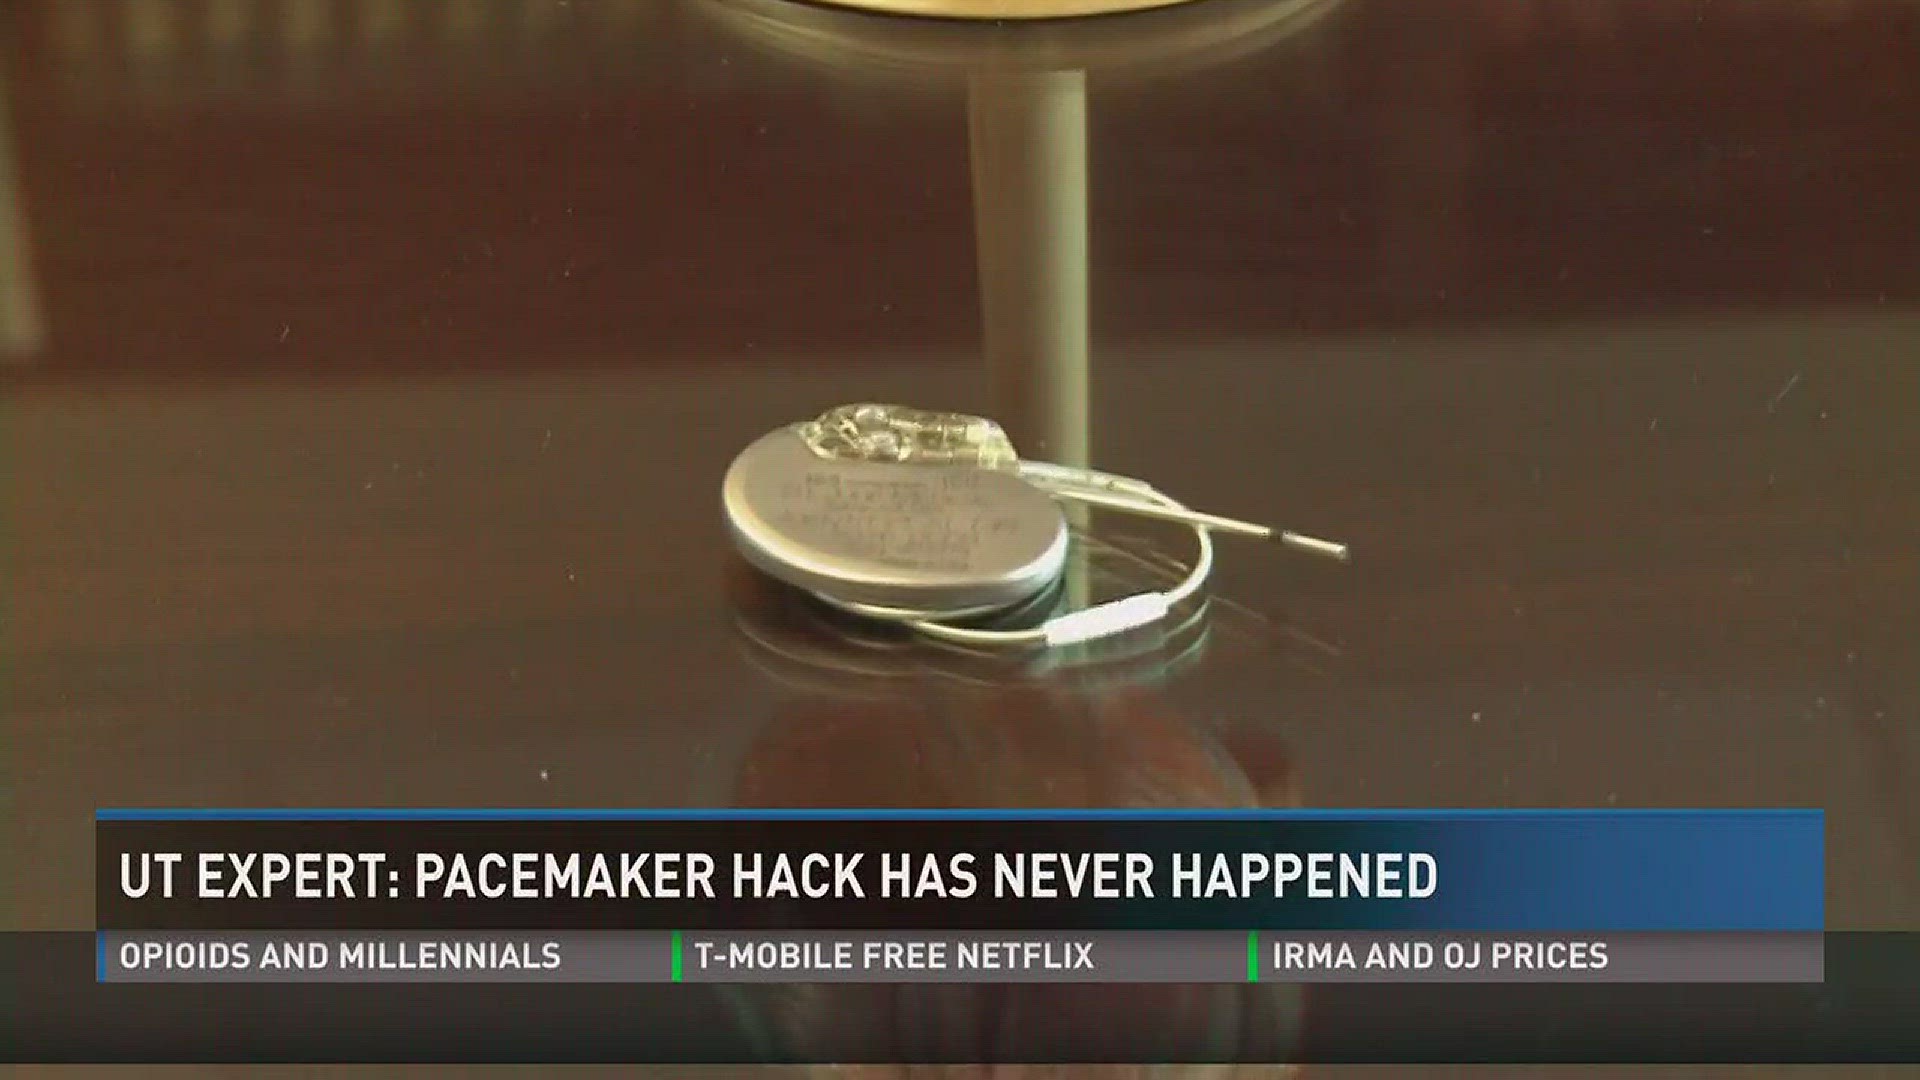 An expert at UT says the likelihood of that hacking actually happening.. is extremely low.